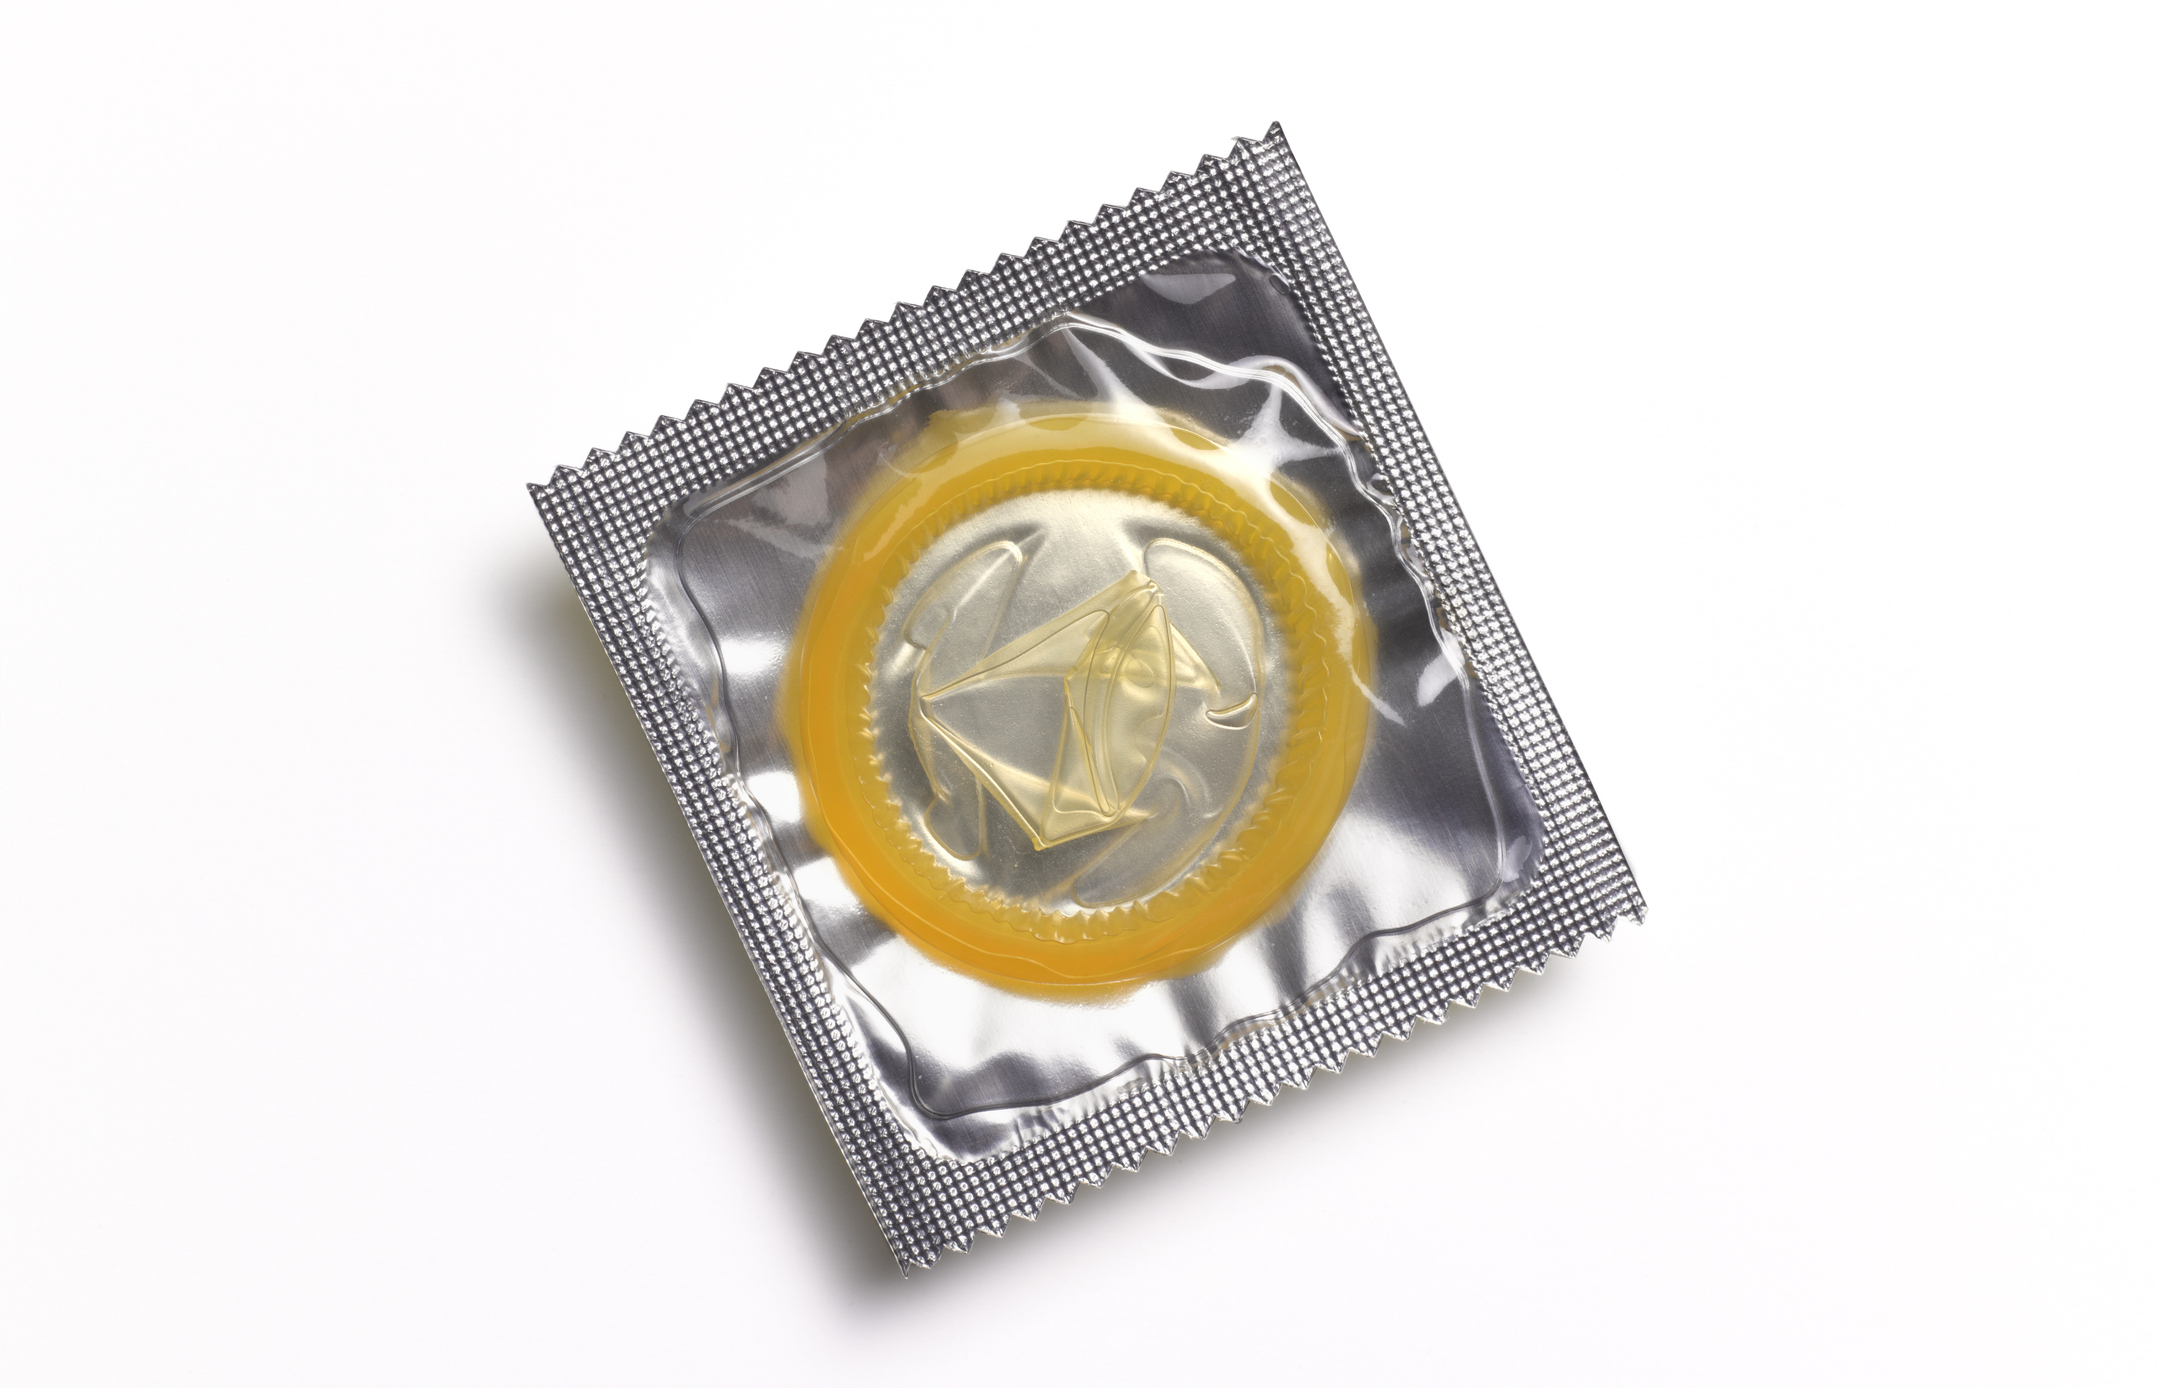 A wrapped condom isolated on a white background